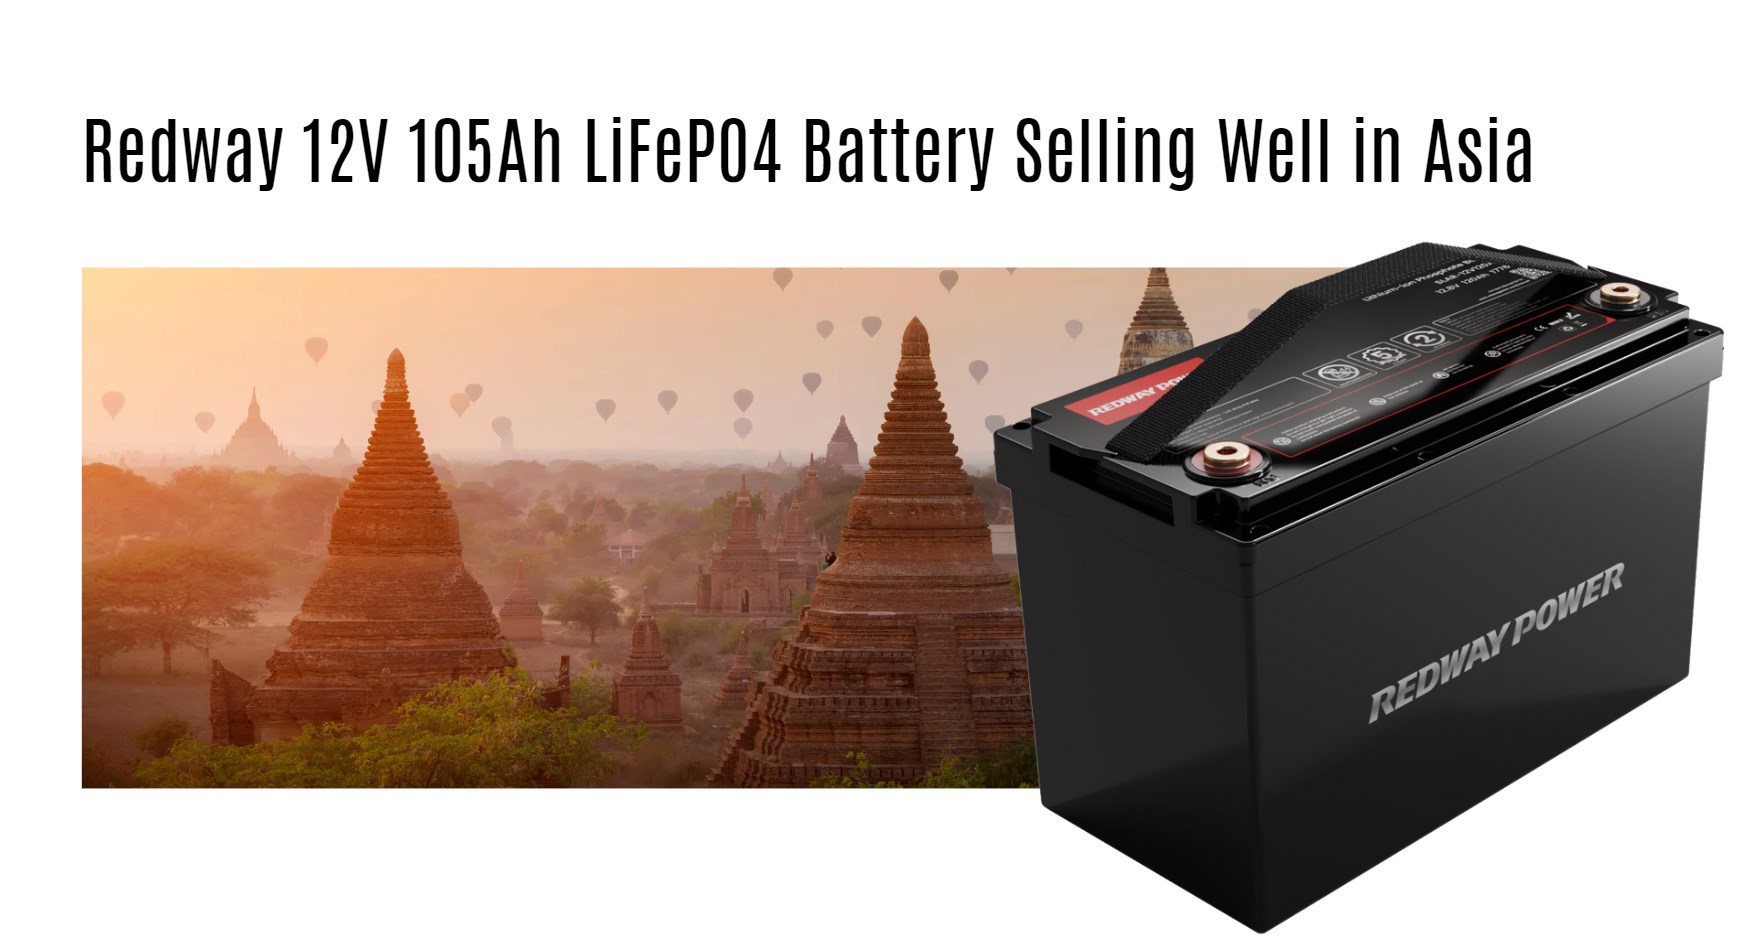 Redway 12V 105Ah LiFePO4 Battery Selling Well in Asia